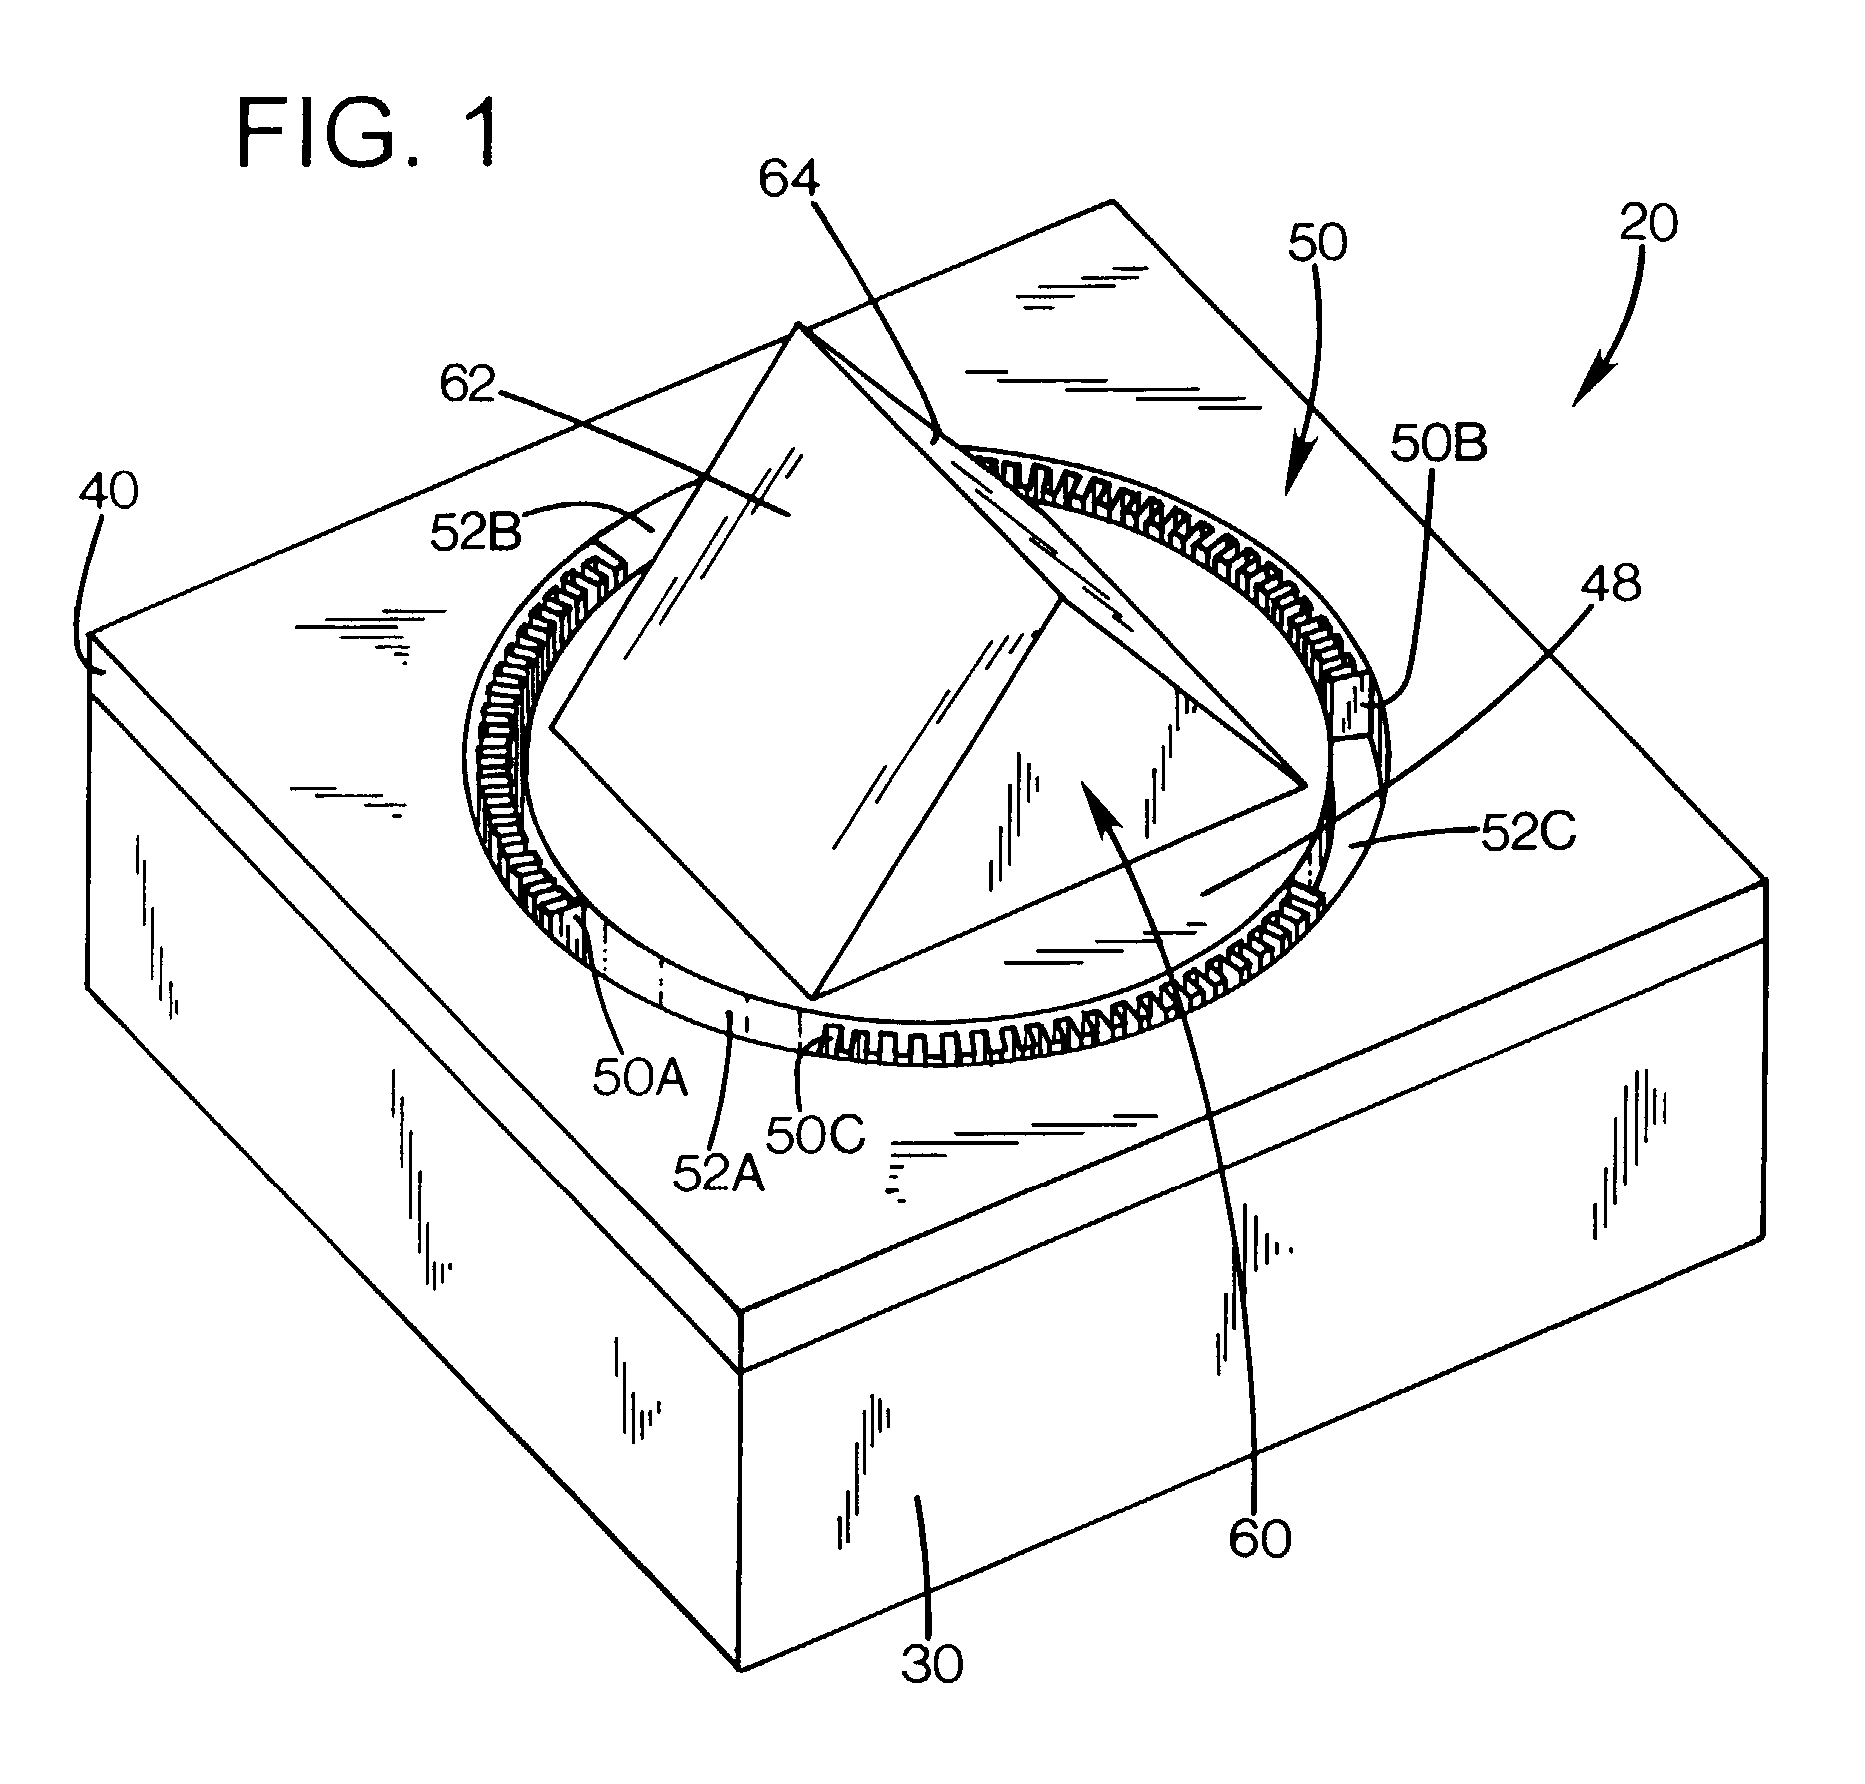 Micro-mirror with rotor structure